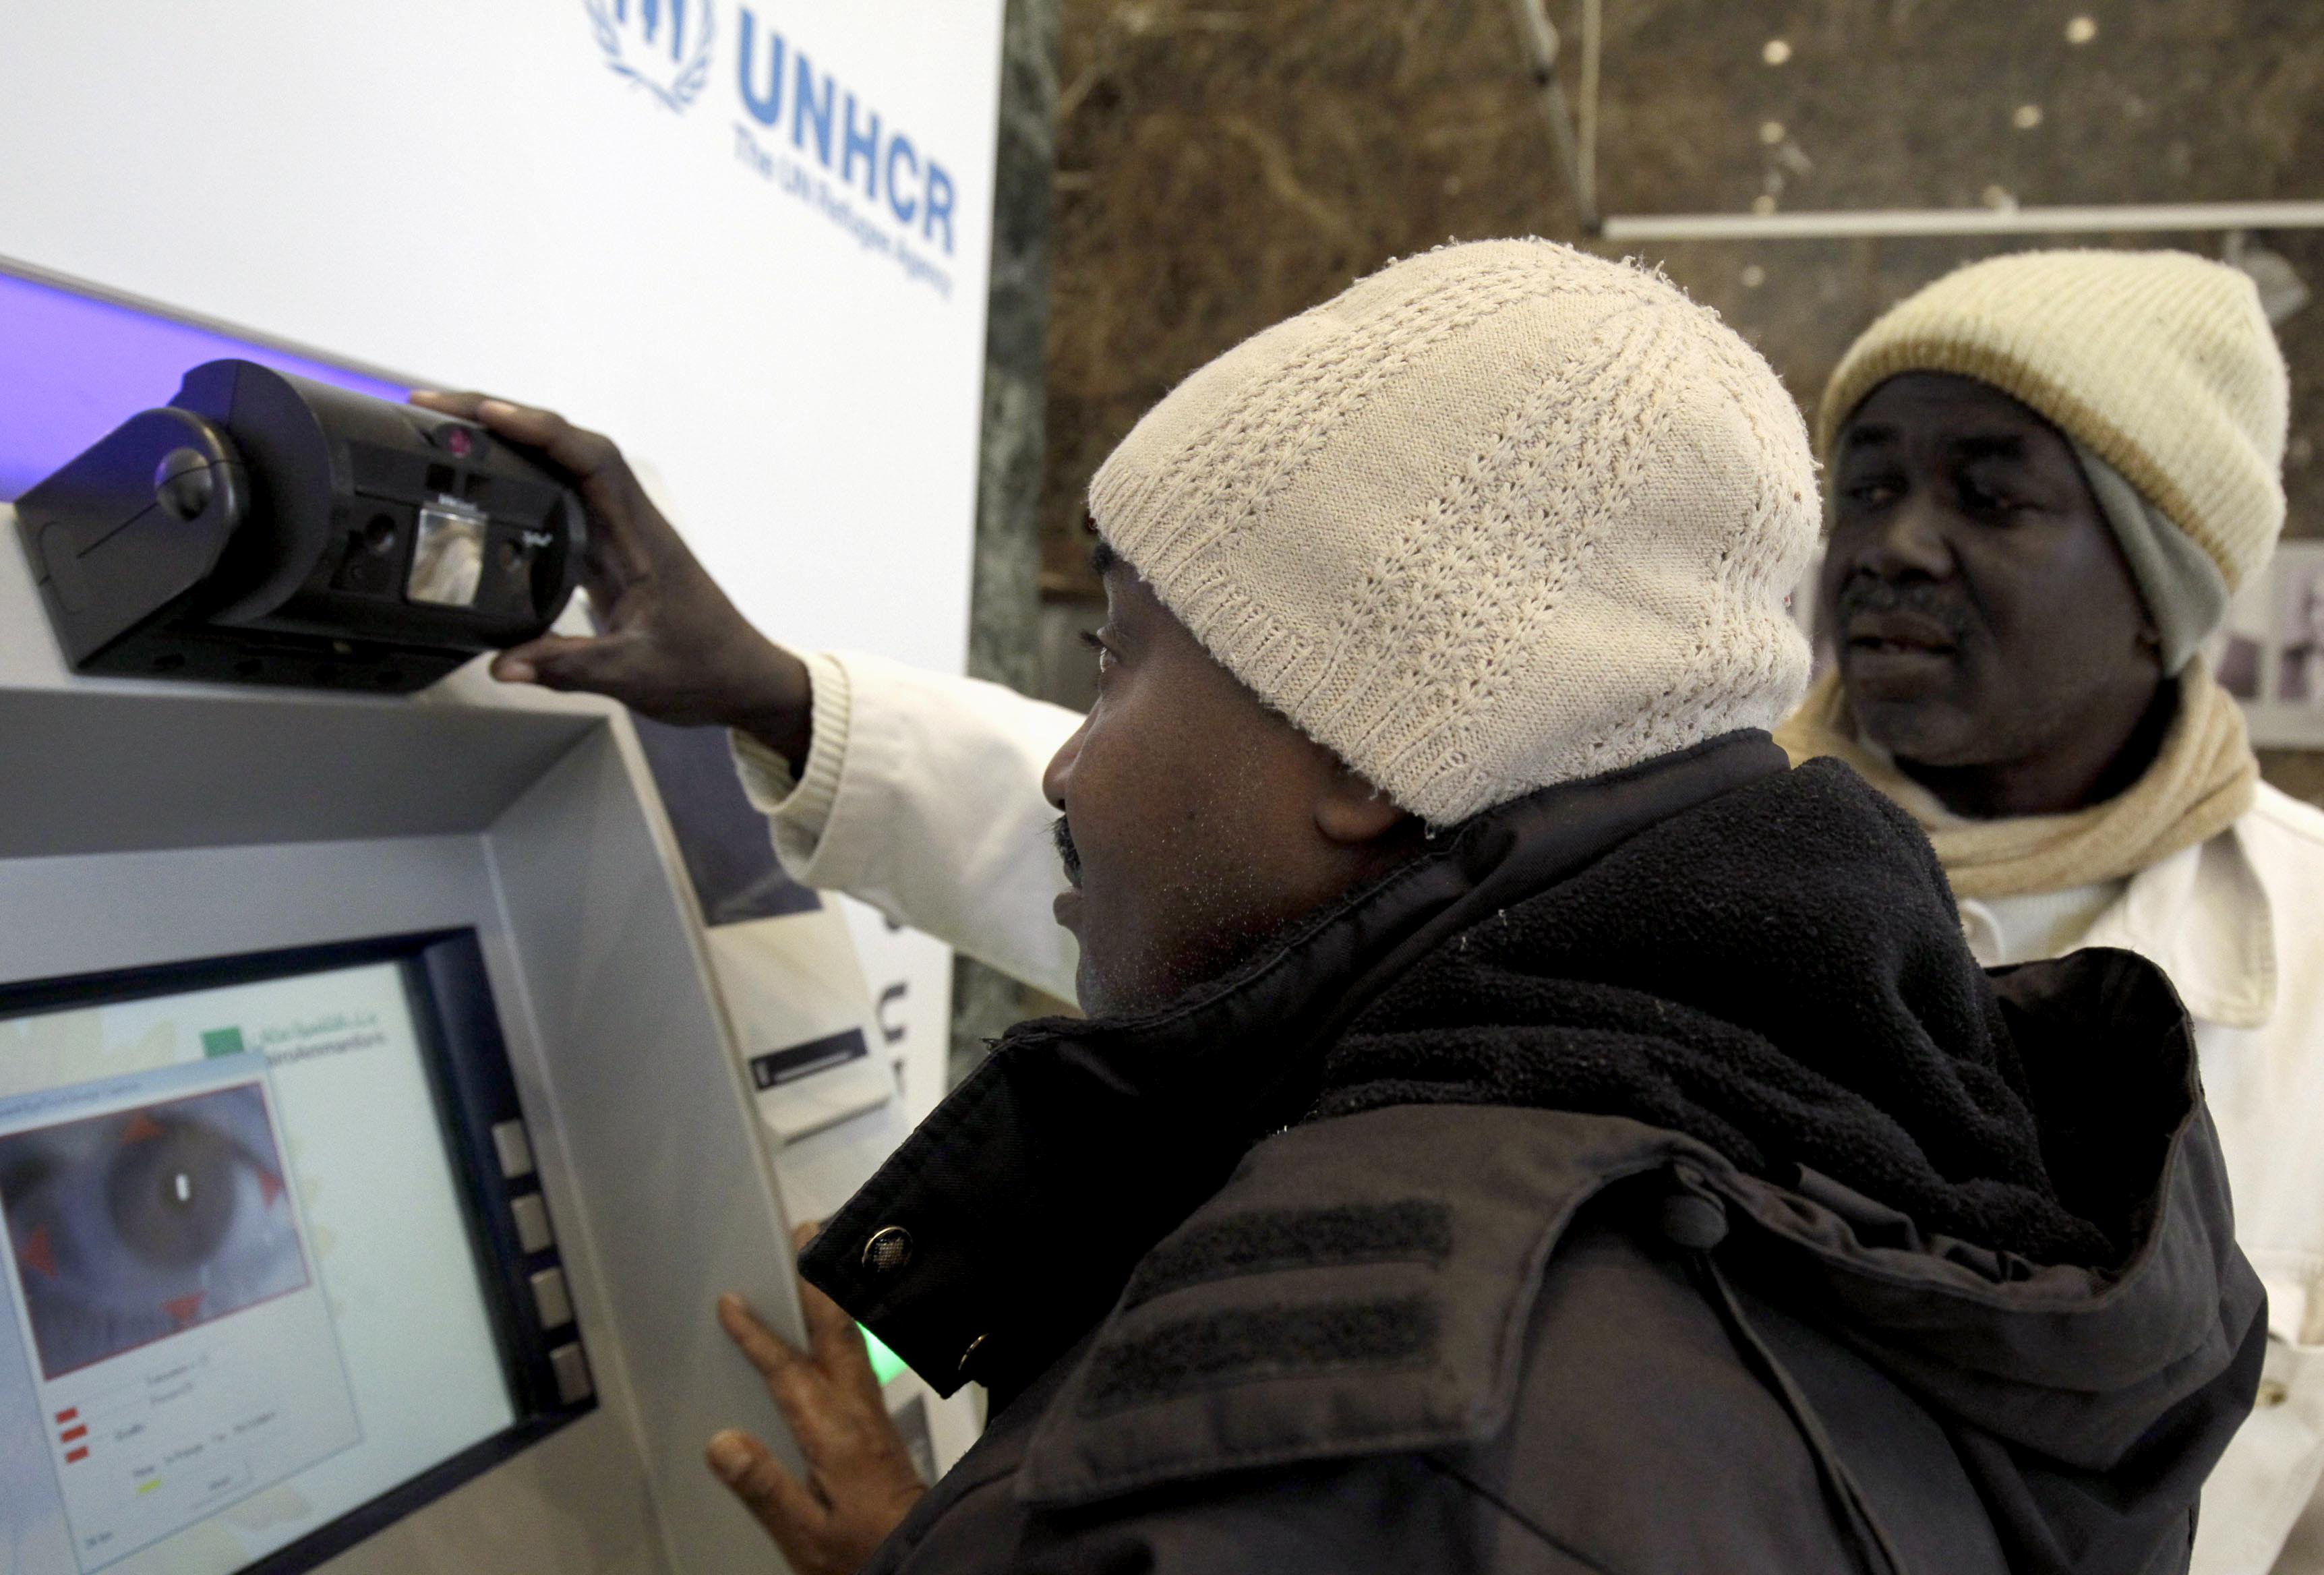 Syrians in refugee camps have eyes scanned - Protocol